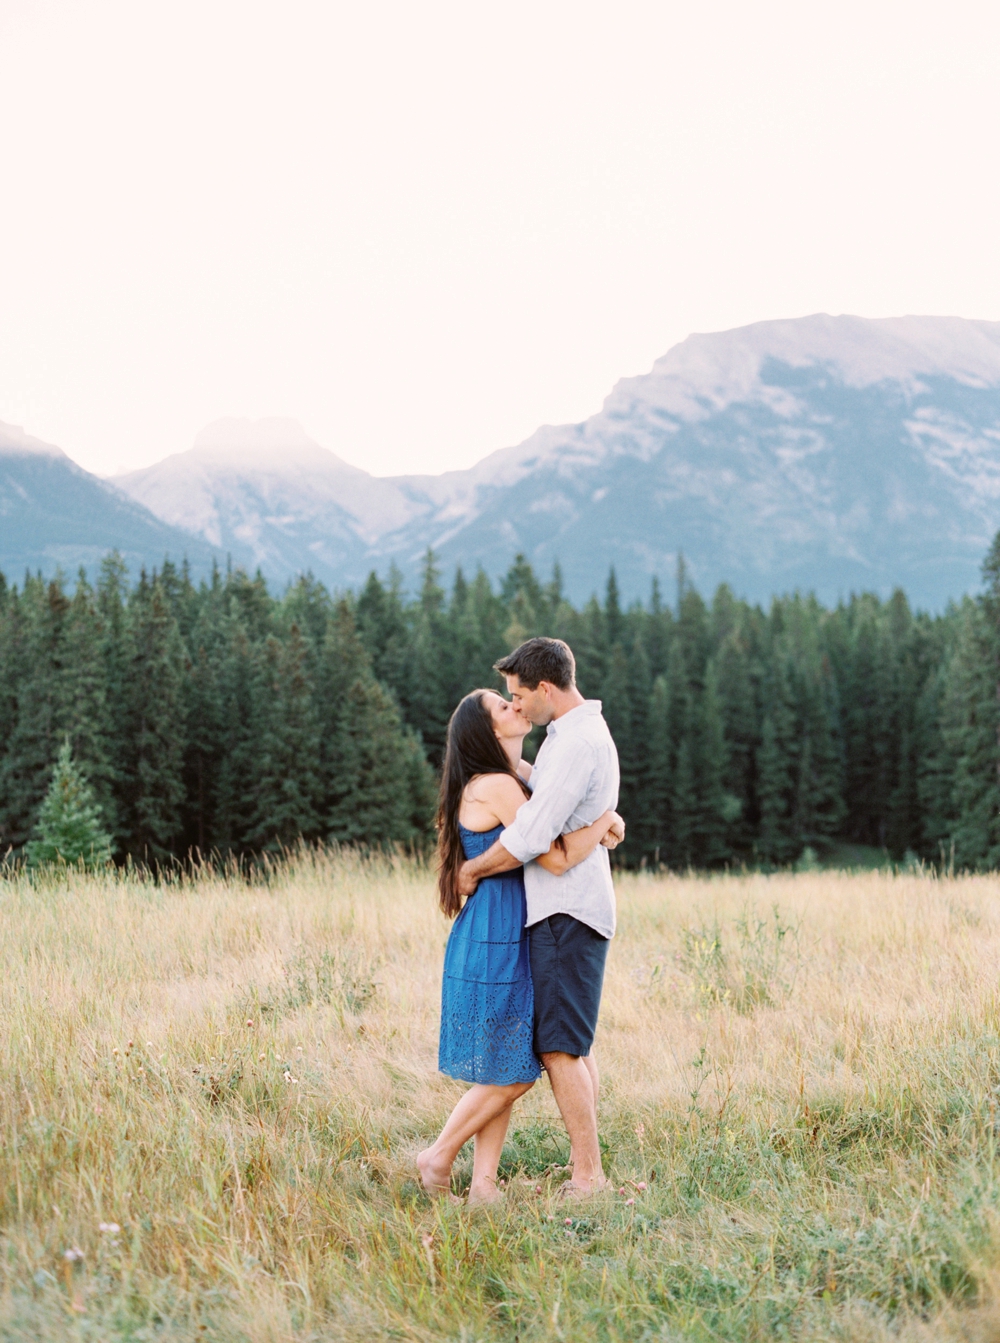 Calgary Family Photographers | Canmore Wedding Photography | Family Vacation Photo Session | Couples Mountain Photographer | Banff Fine Art Film Photographer